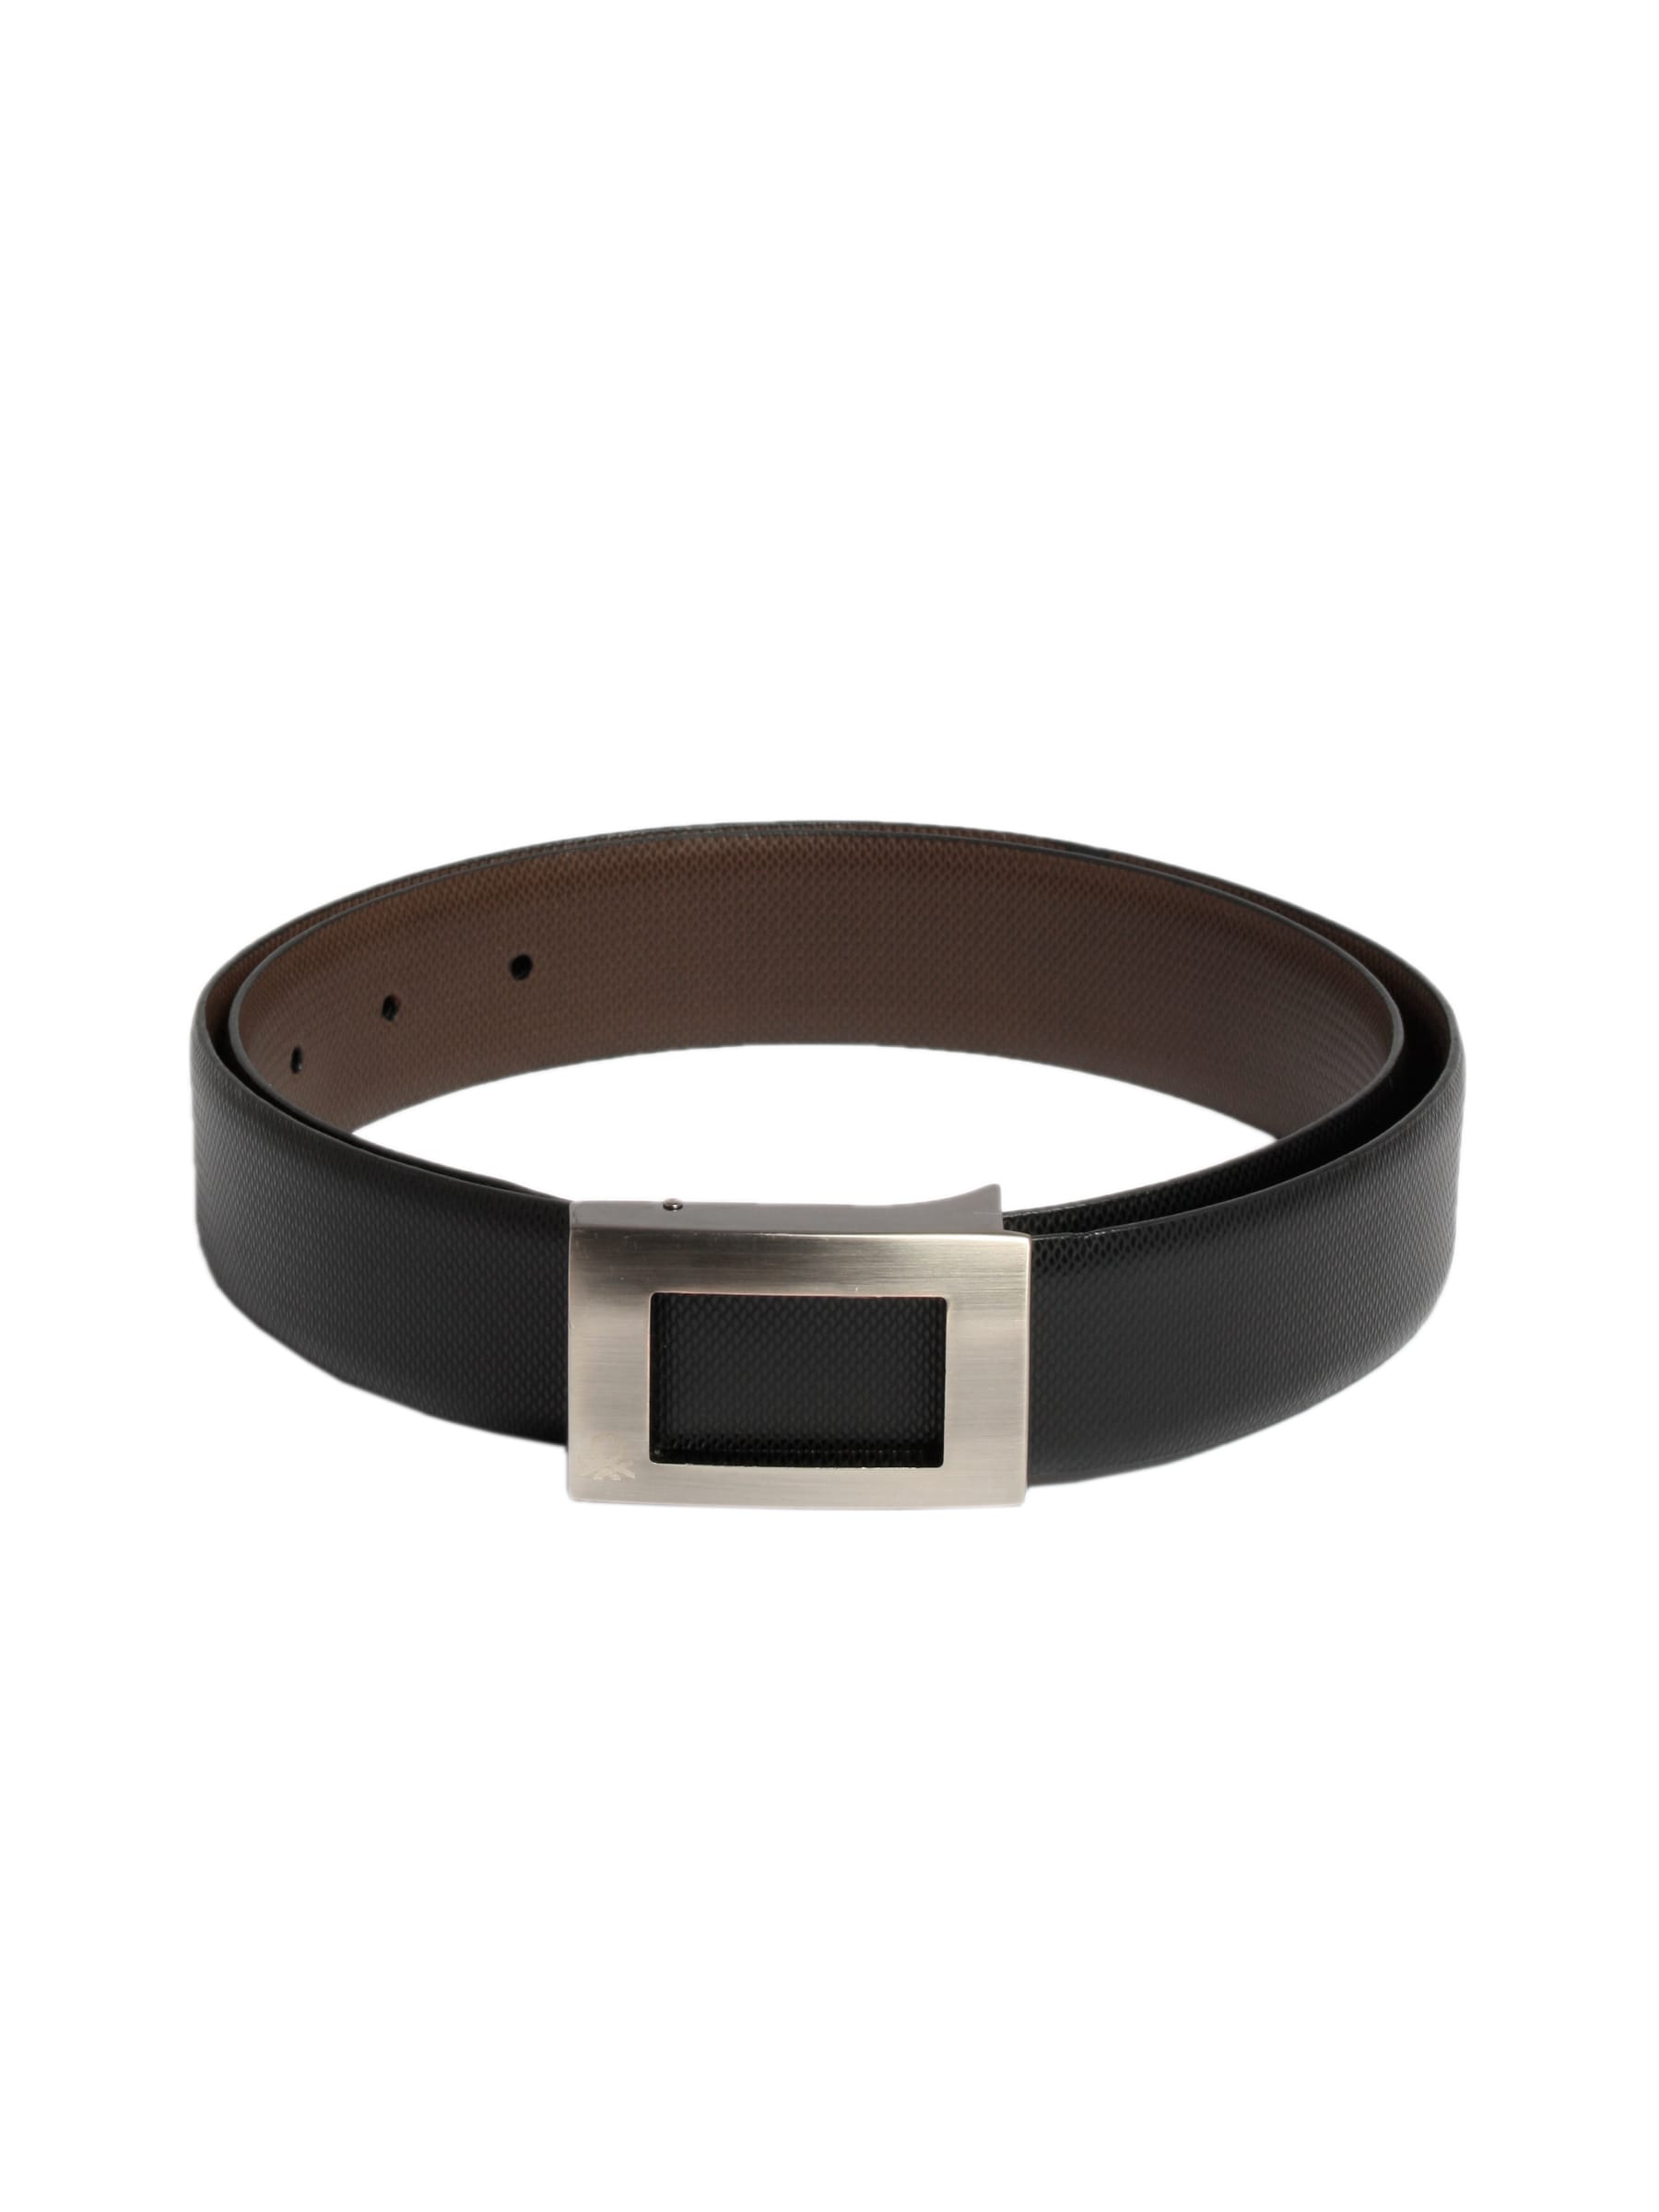 United Colors of Benetton Solid Belt